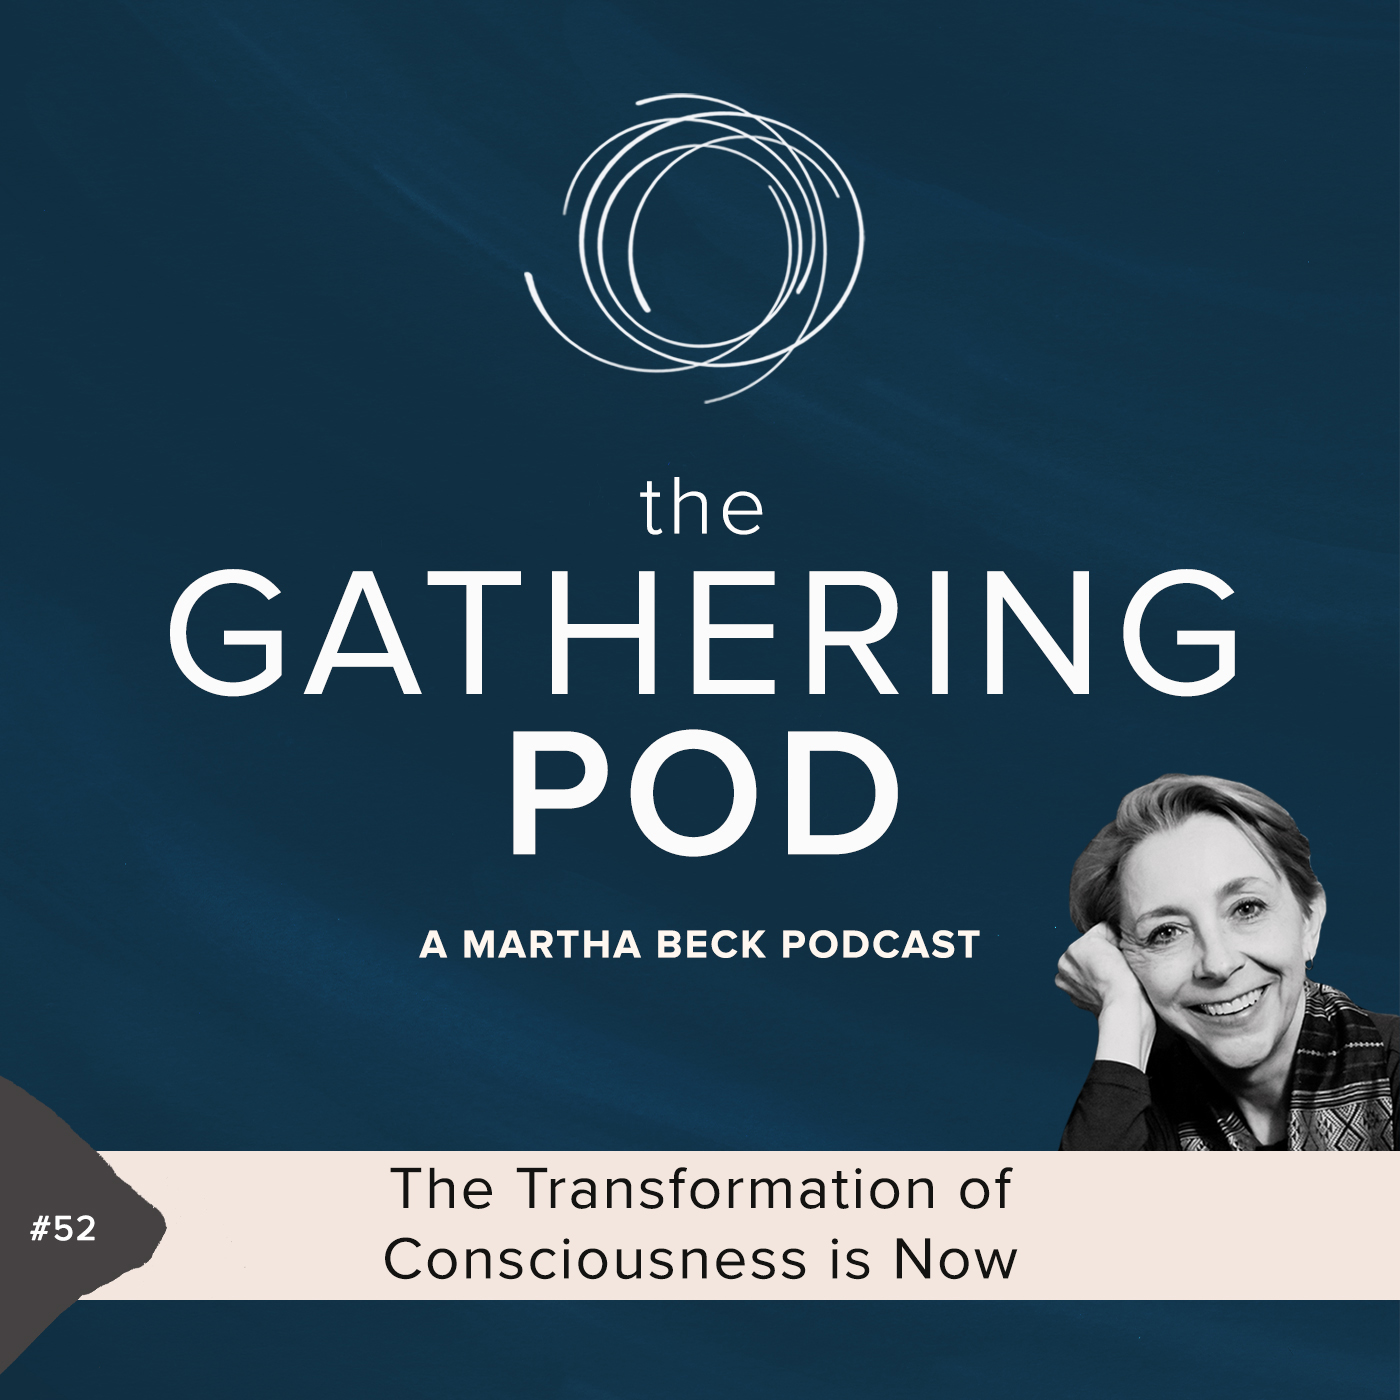 Image for The Gathering Pod A Martha Beck Podcast Episode #52 The Transformation of Consciousness is Now